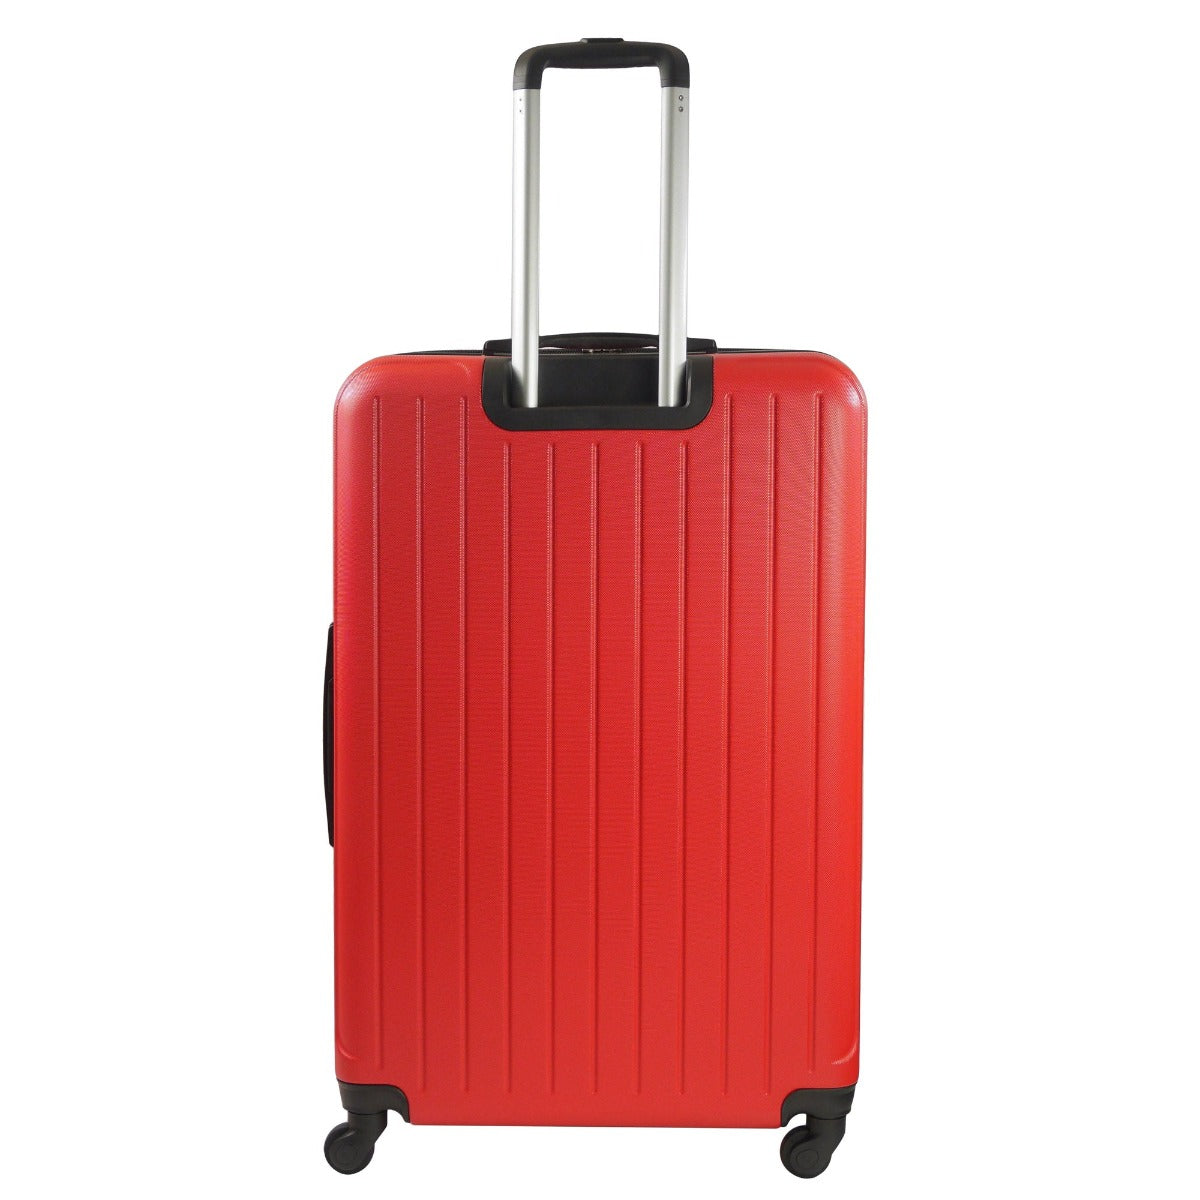 Ful Pure II  31" hard-side spinner red luggage